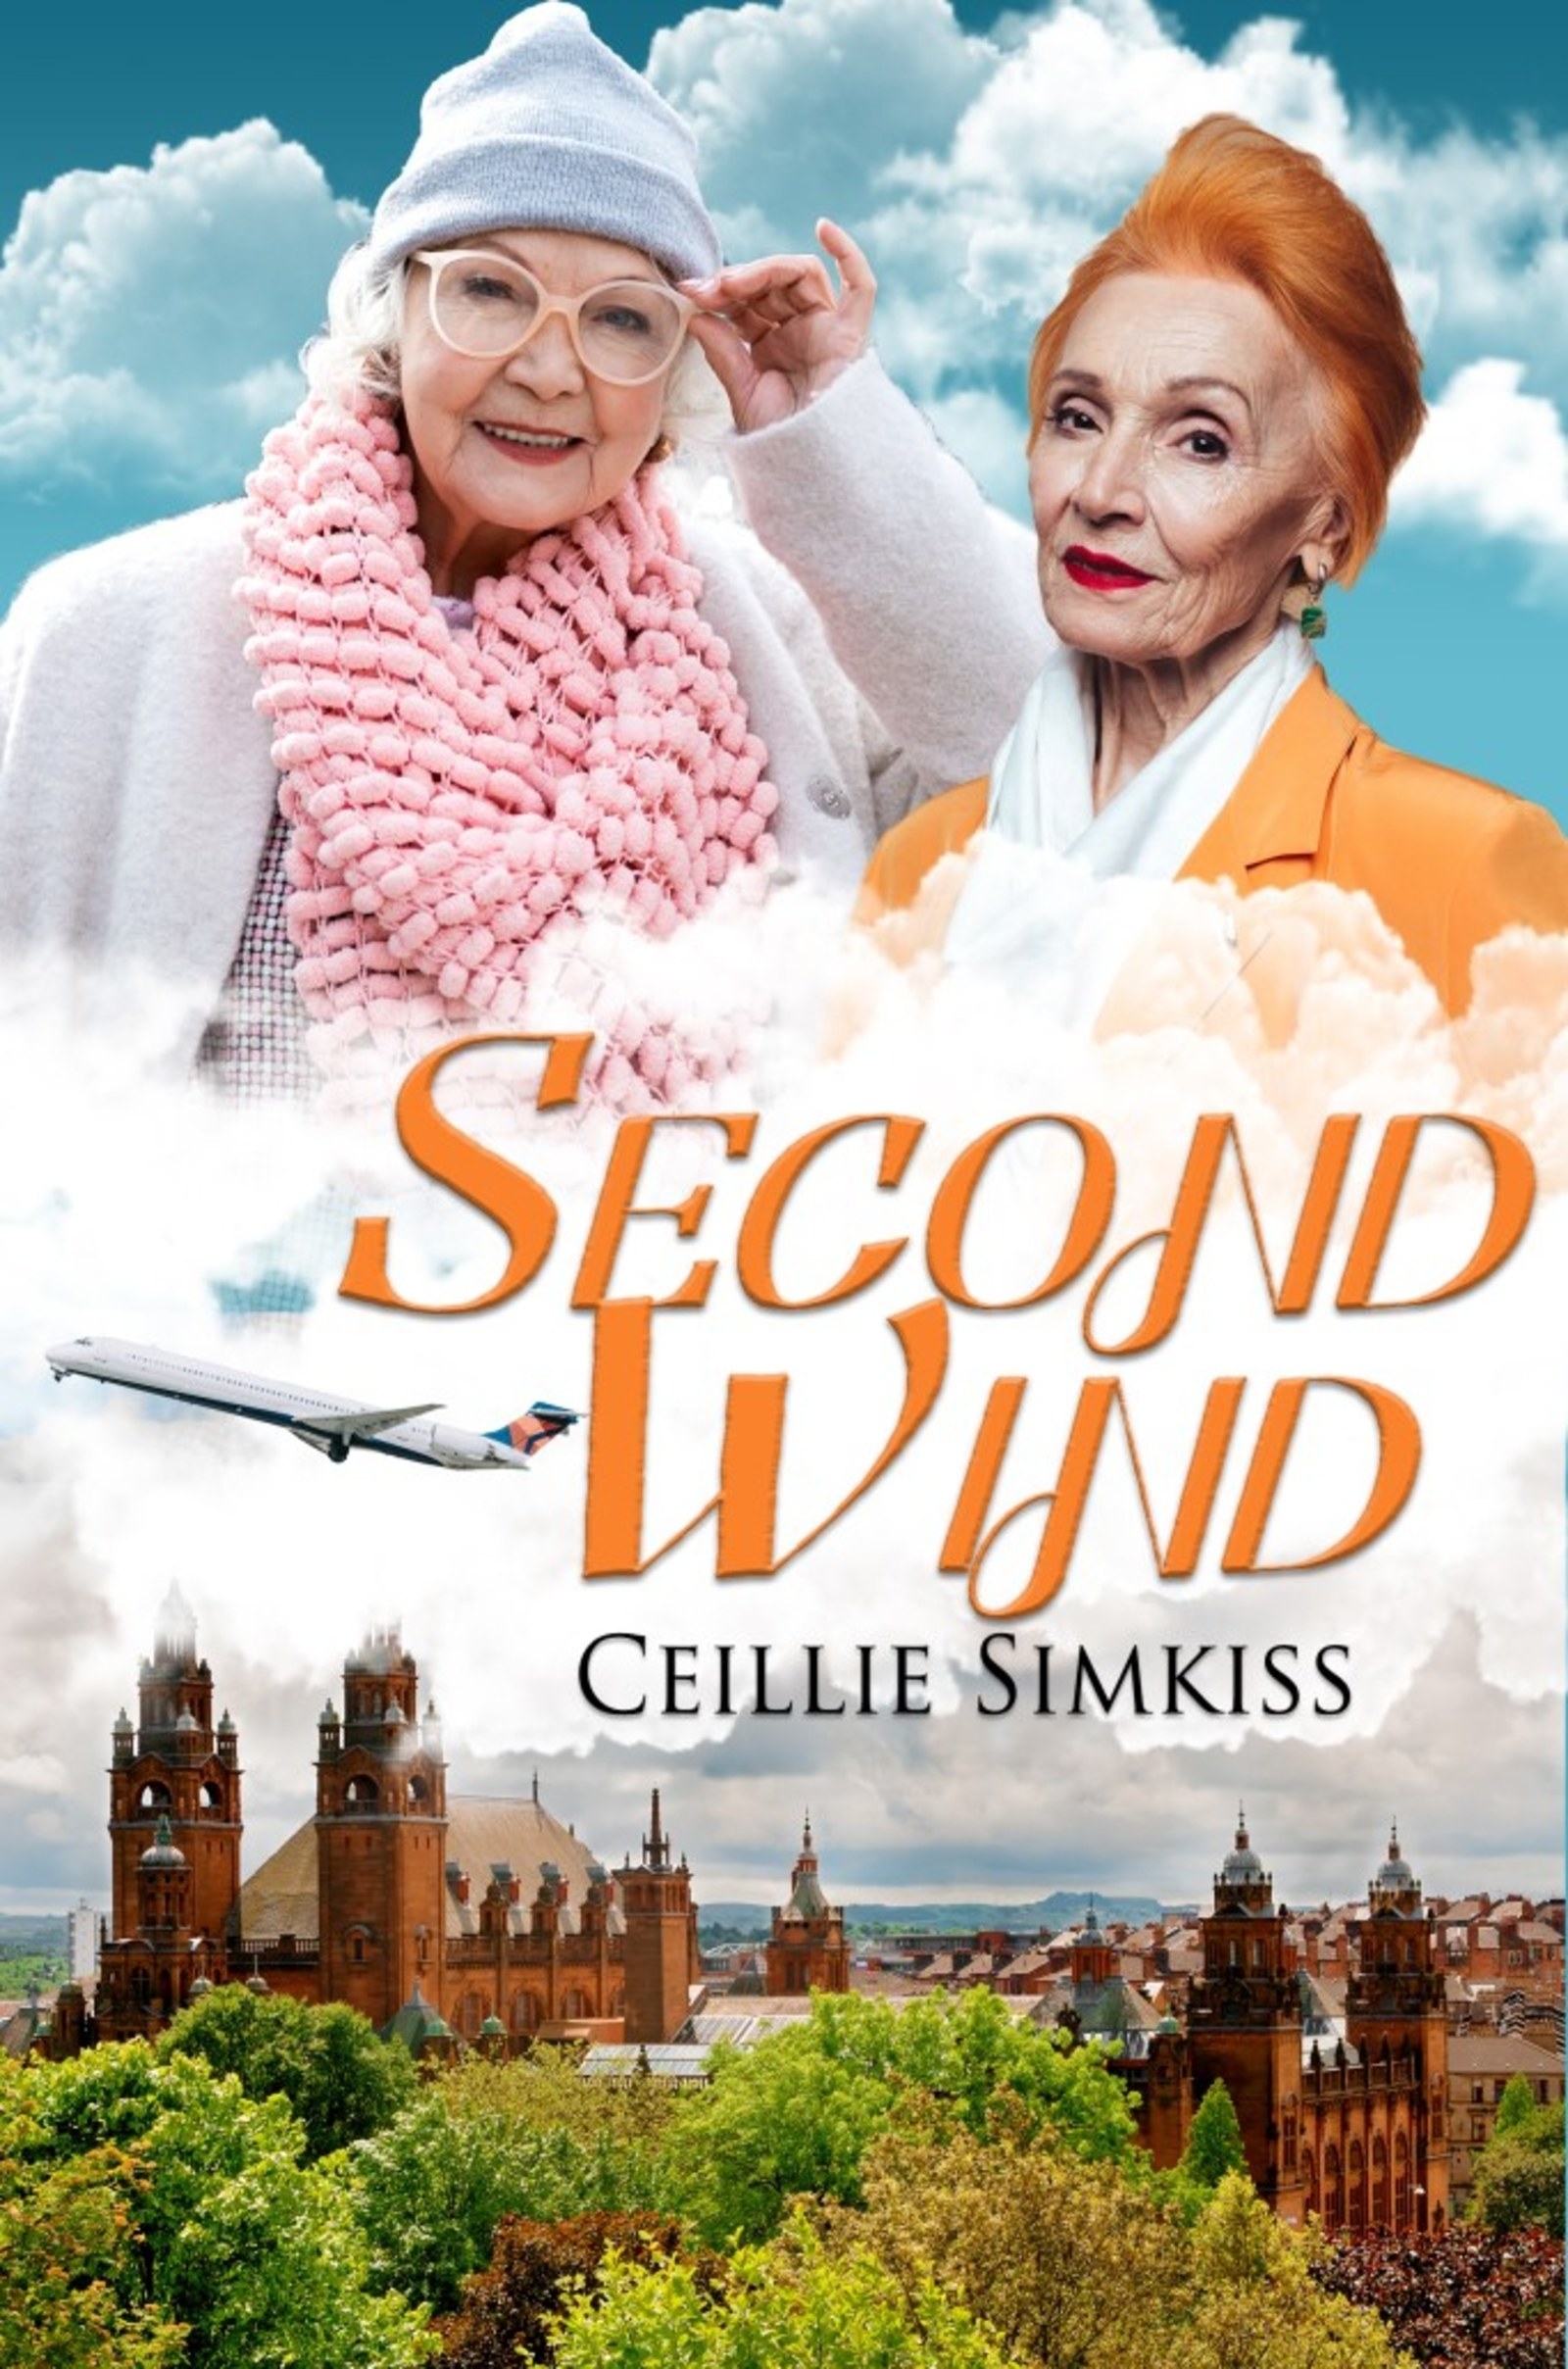 Book Cover of Second Wind by Ceillie Simkiss